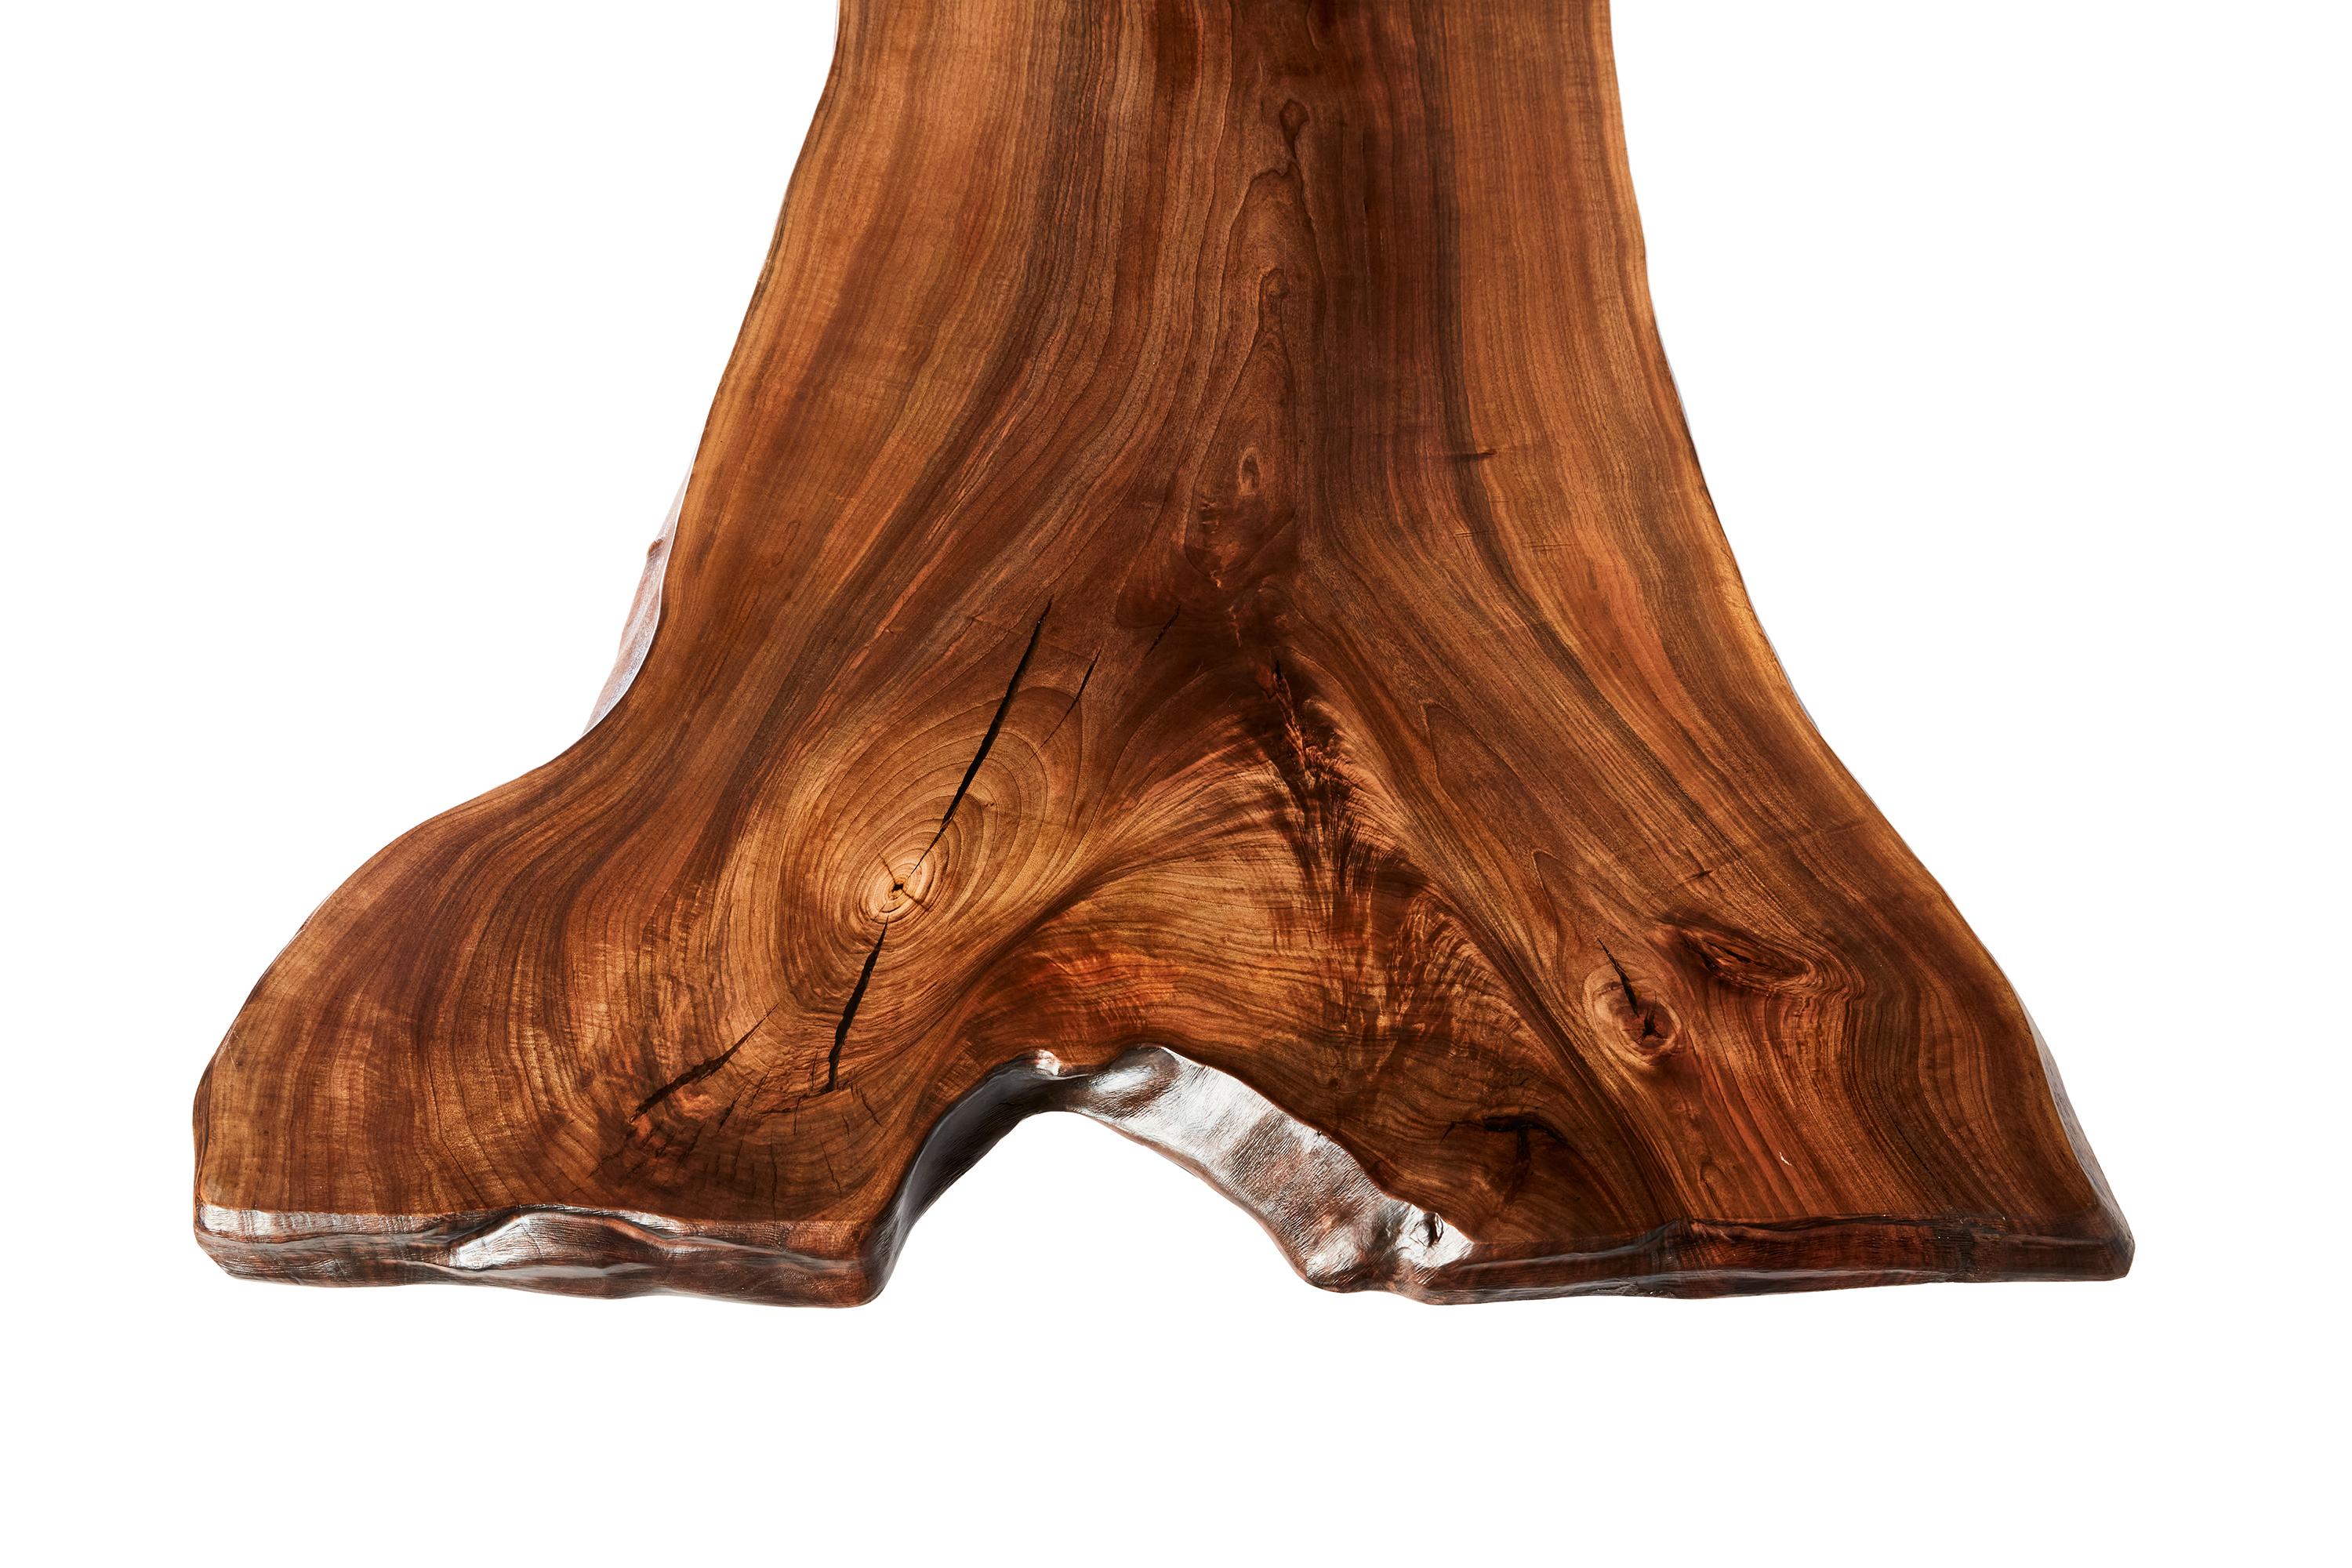 The stunning walnut table shown here was made in Ankara, Turkey with wood gathered walnut wood from the forests of the Mediterranean. The wood is kilned and dried prior to being filled with high quality resin in areas of natural cracking. 

This